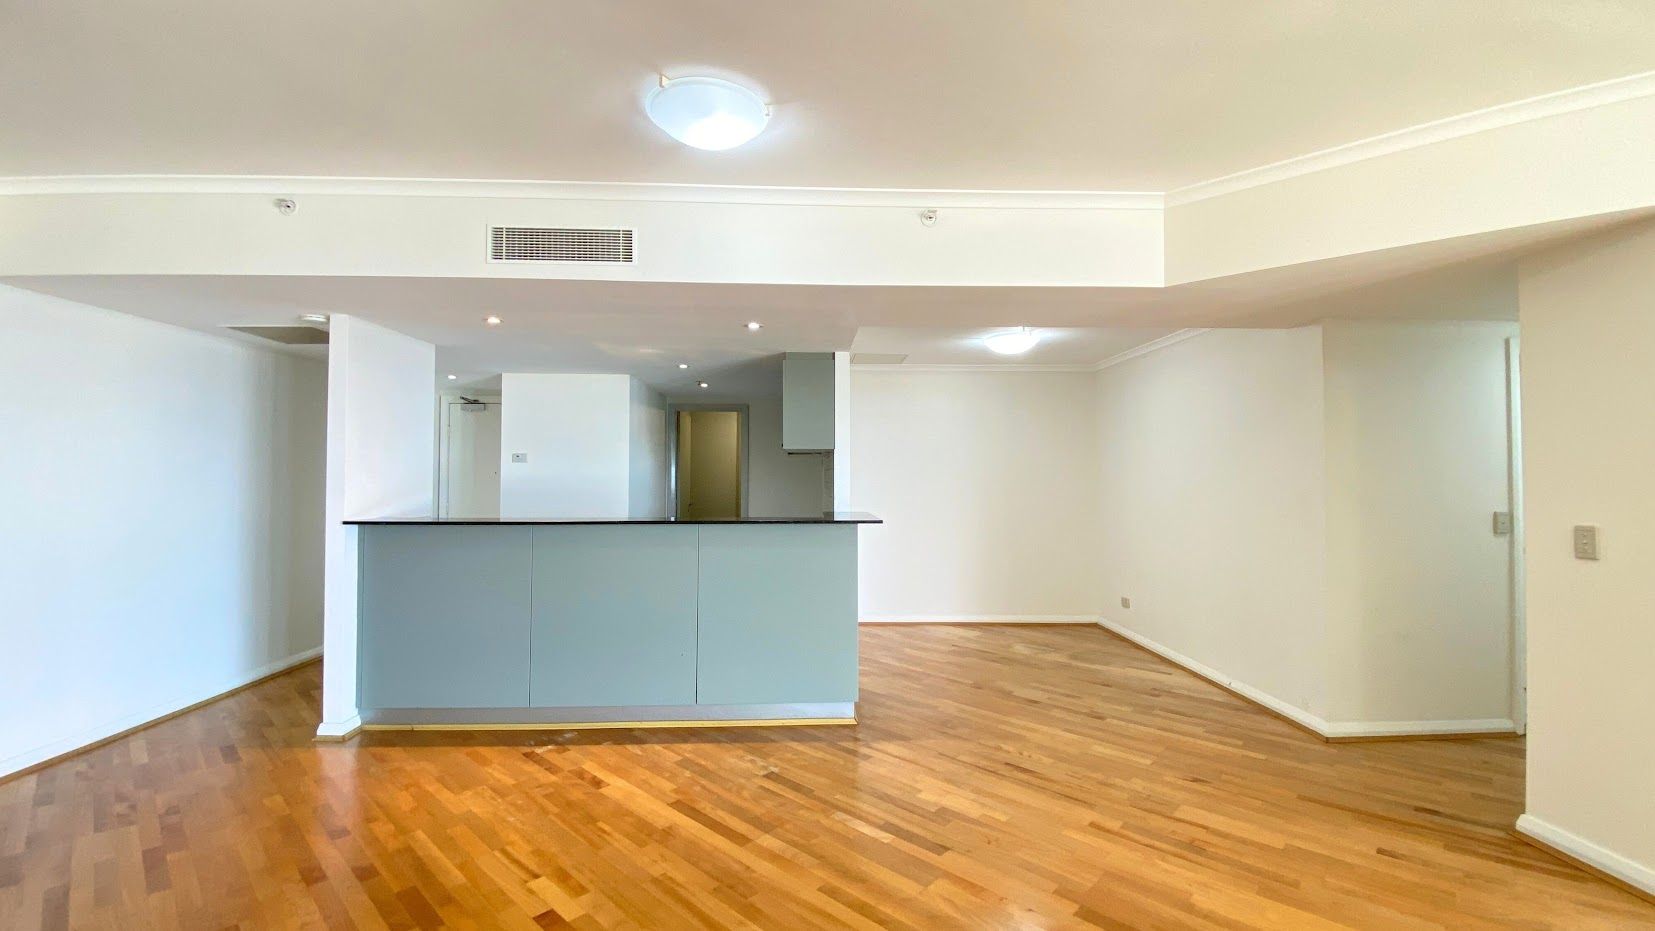 2 bedrooms Apartment / Unit / Flat in 1305/2A Help Street CHATSWOOD NSW, 2067